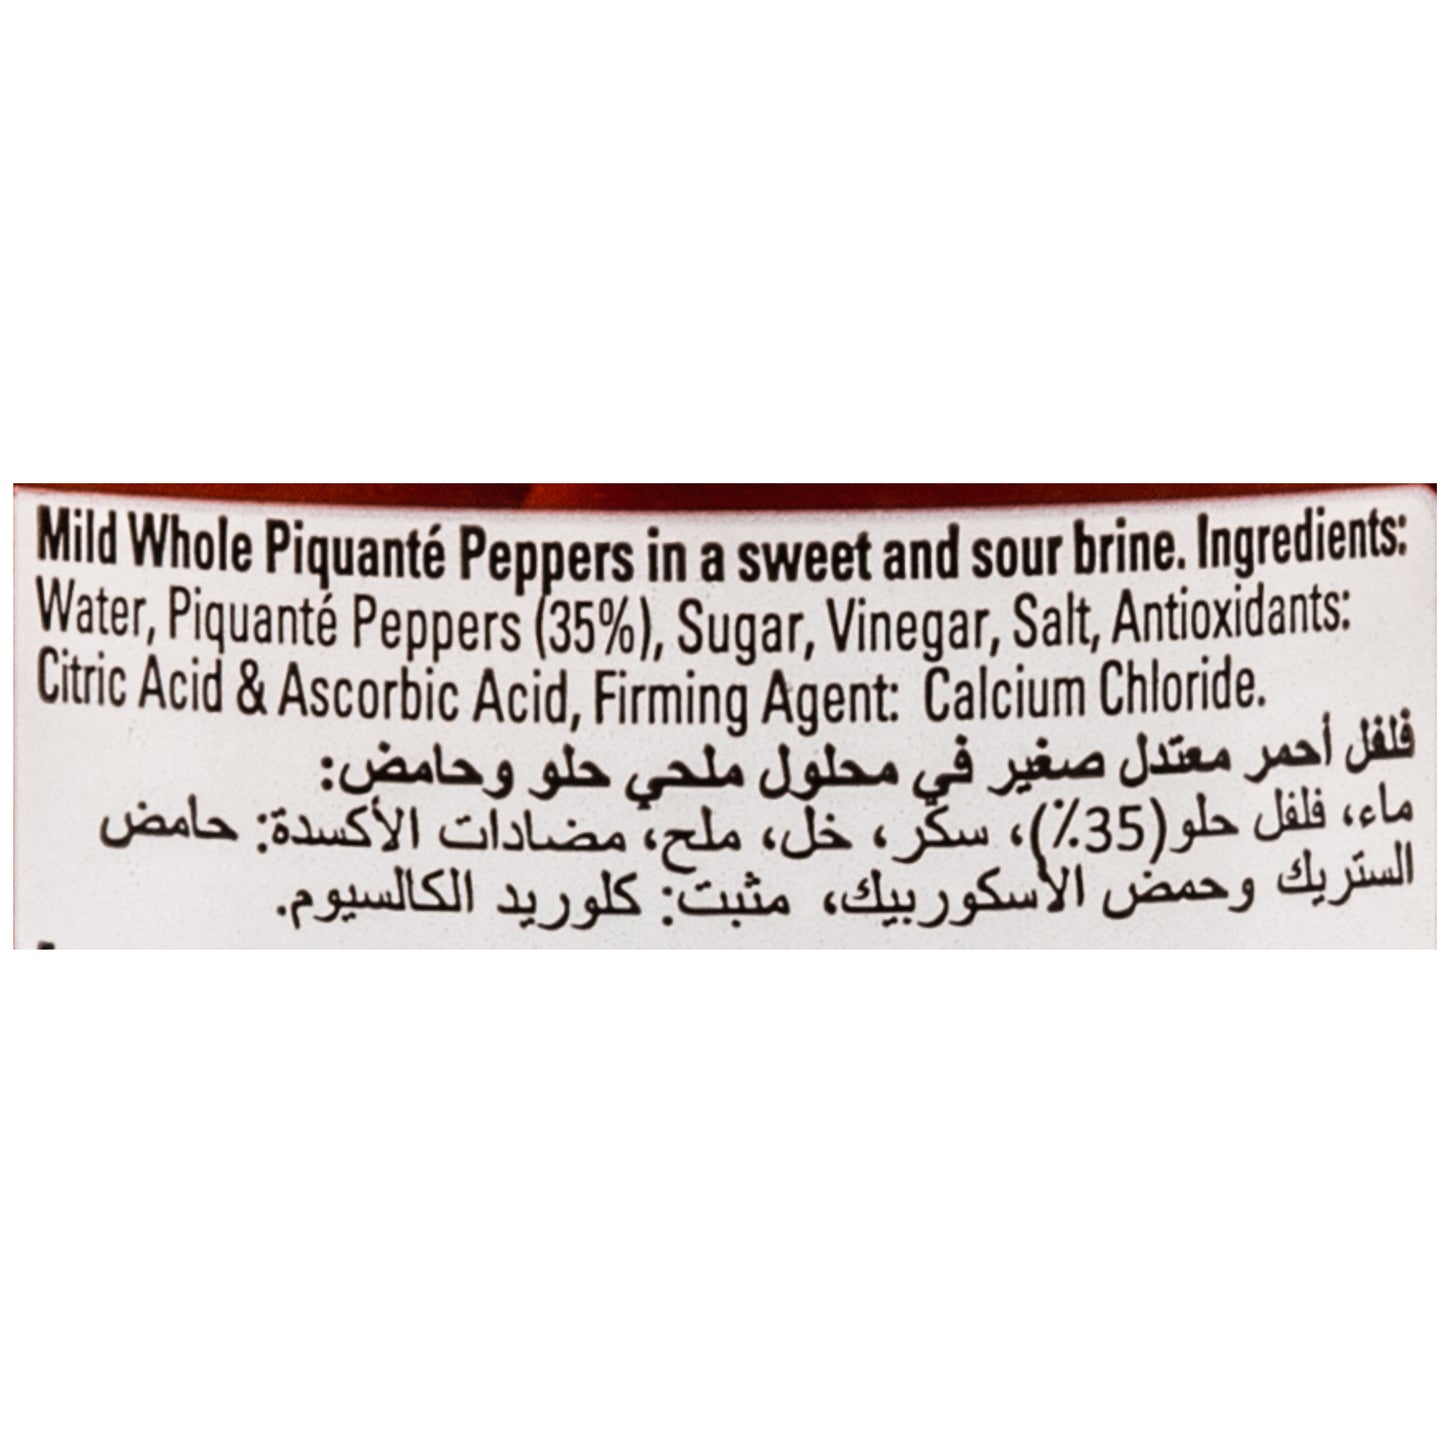 Peppadew Mild Piquante Peppers Whole 400g